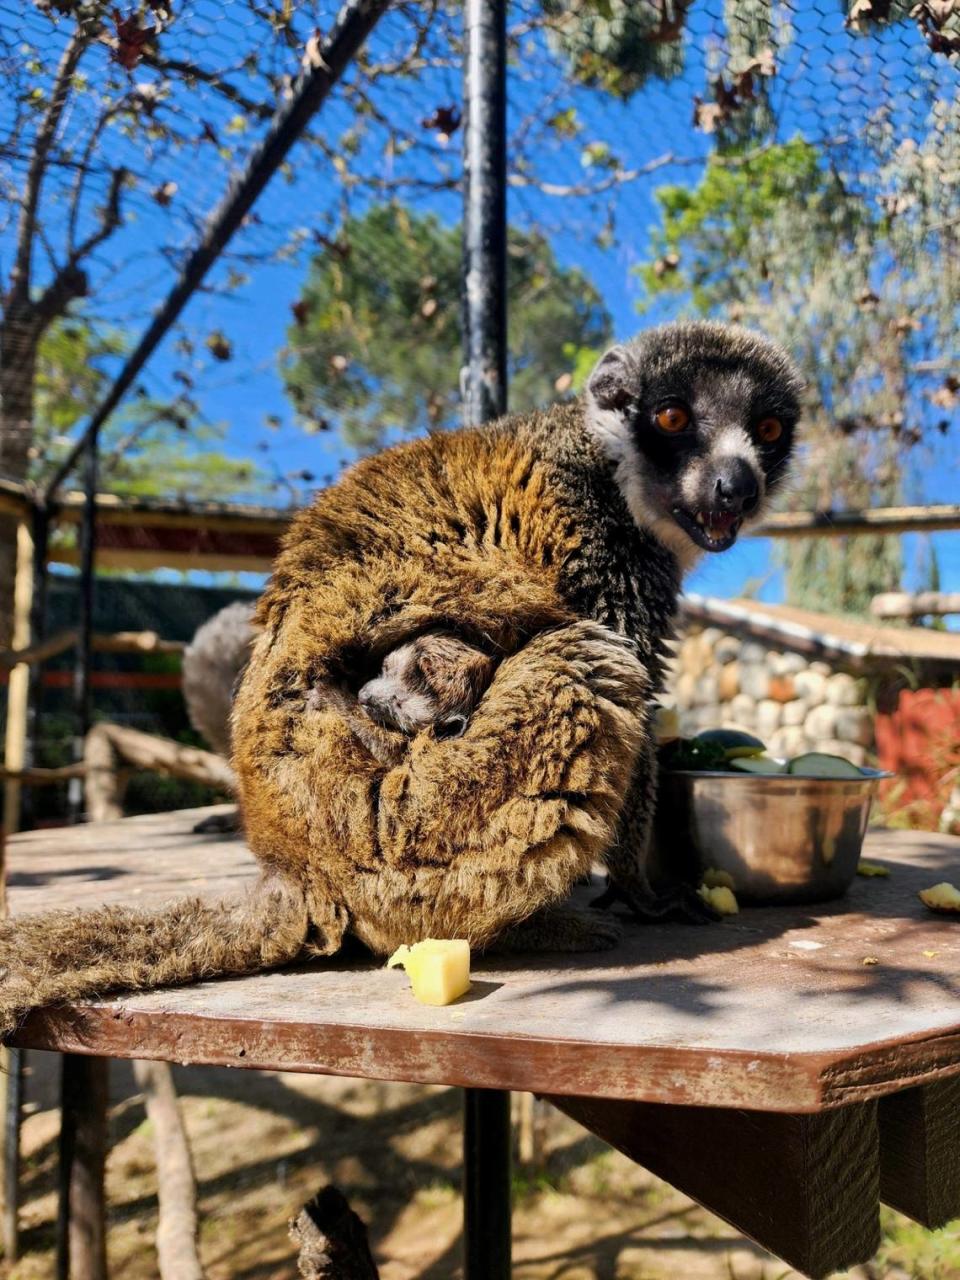 A mongoose lemur was born at the Charles Paddock Zoo in Atascadero in early April 2024. Mongoose lemurs are considered a “critically endangered” species due to deforestation and poaching, according to the International Union for Conservation of Nature’s Red List.